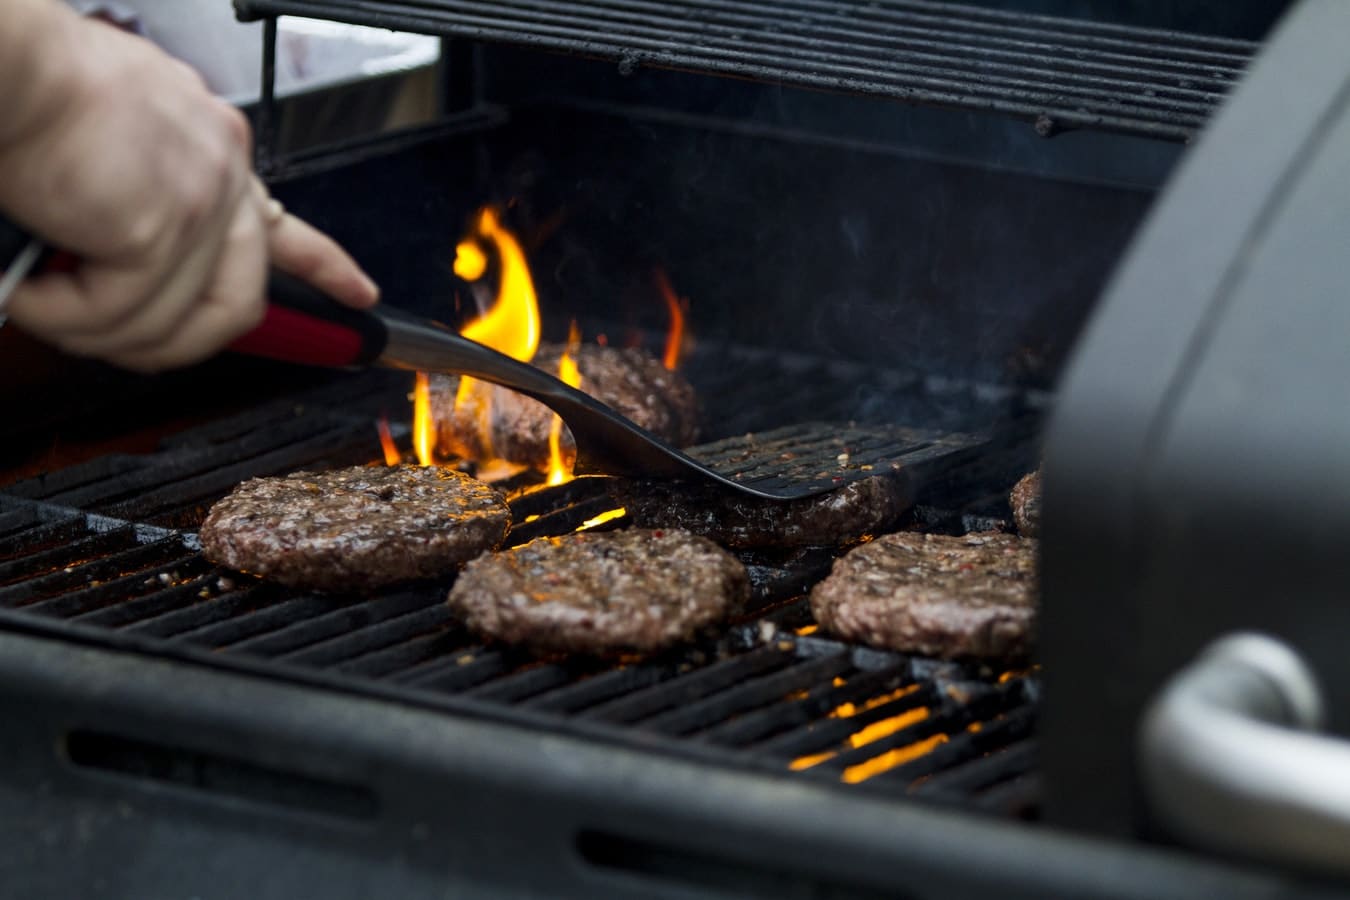 A man grilling burgers on a grille outside